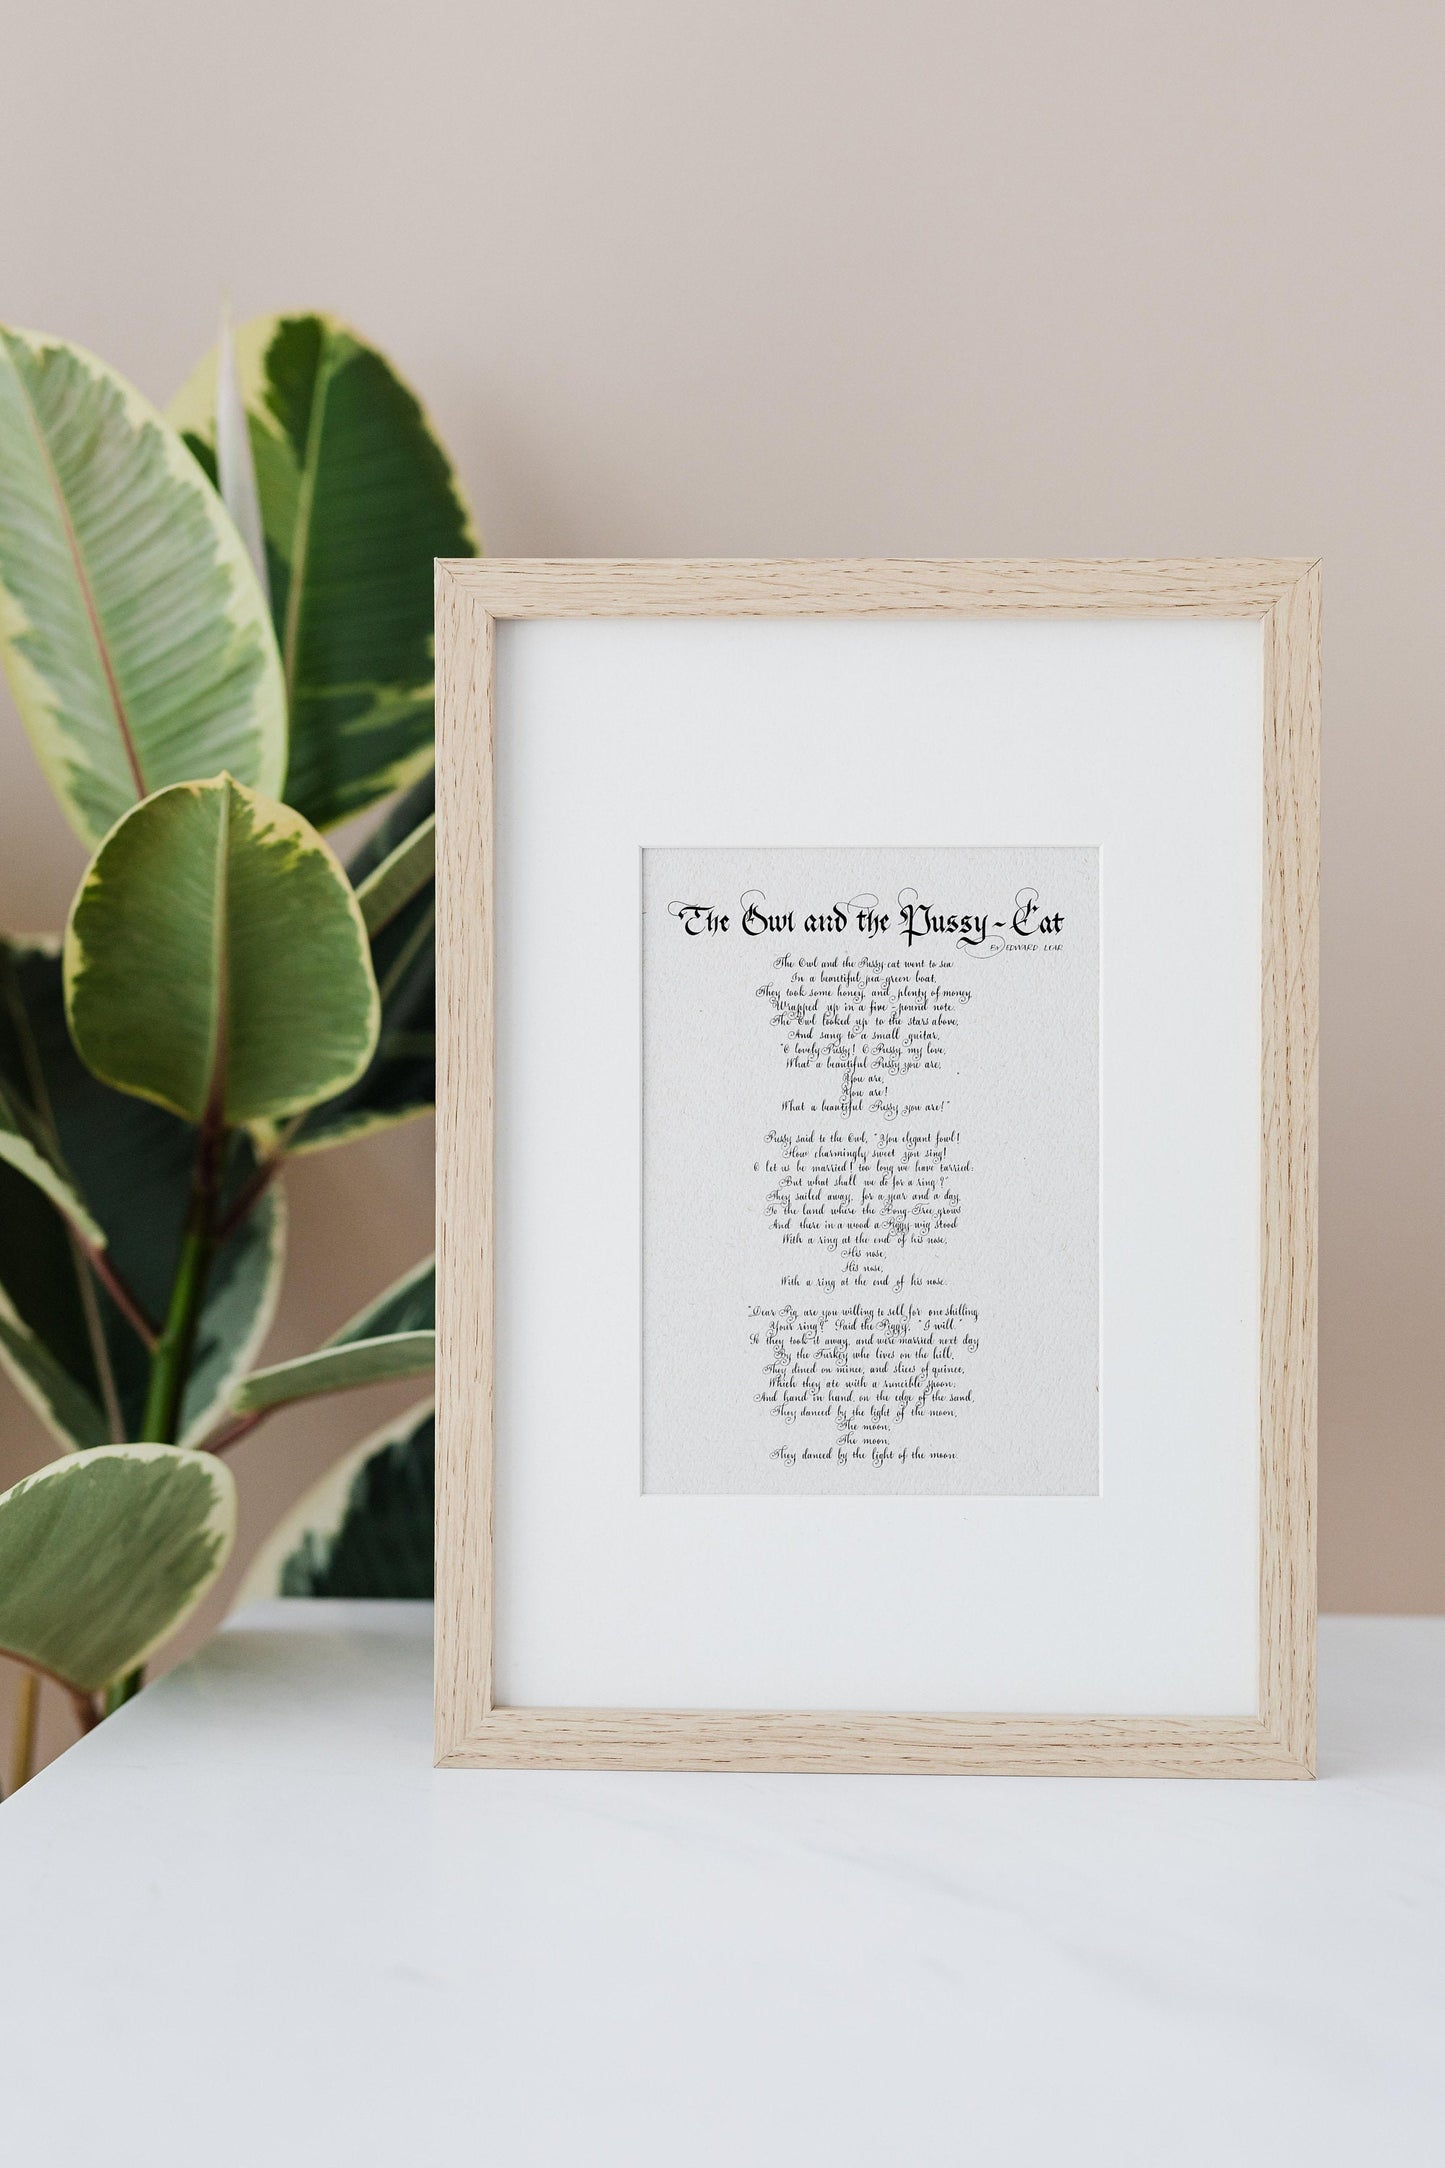 The Owl and the Pussycat print Framed Edward Lear poem framed poster - The Owl and the Pussycat Calligraphy Print